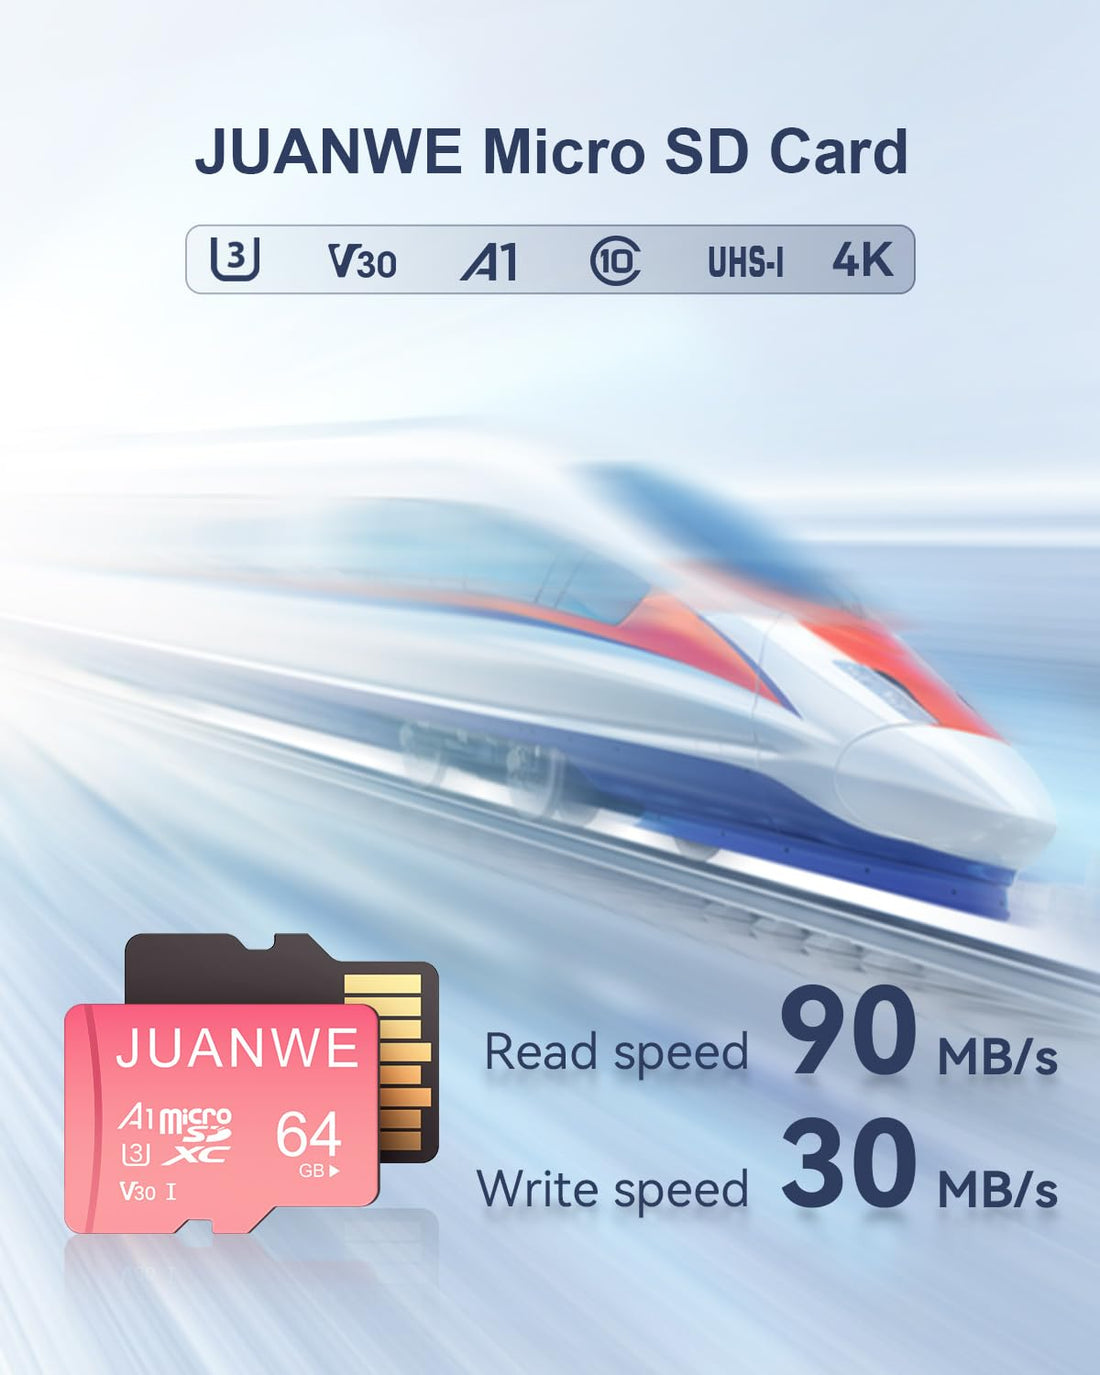 JUANWE 5 Pack 64GB Micro SD Card + Adapter 64 GB SD Card Memory Card microSDXC V30 4K Video Recording U3 A1 TF Card for Nintendo-Switch, Dash Cam, Security Camera, Pink